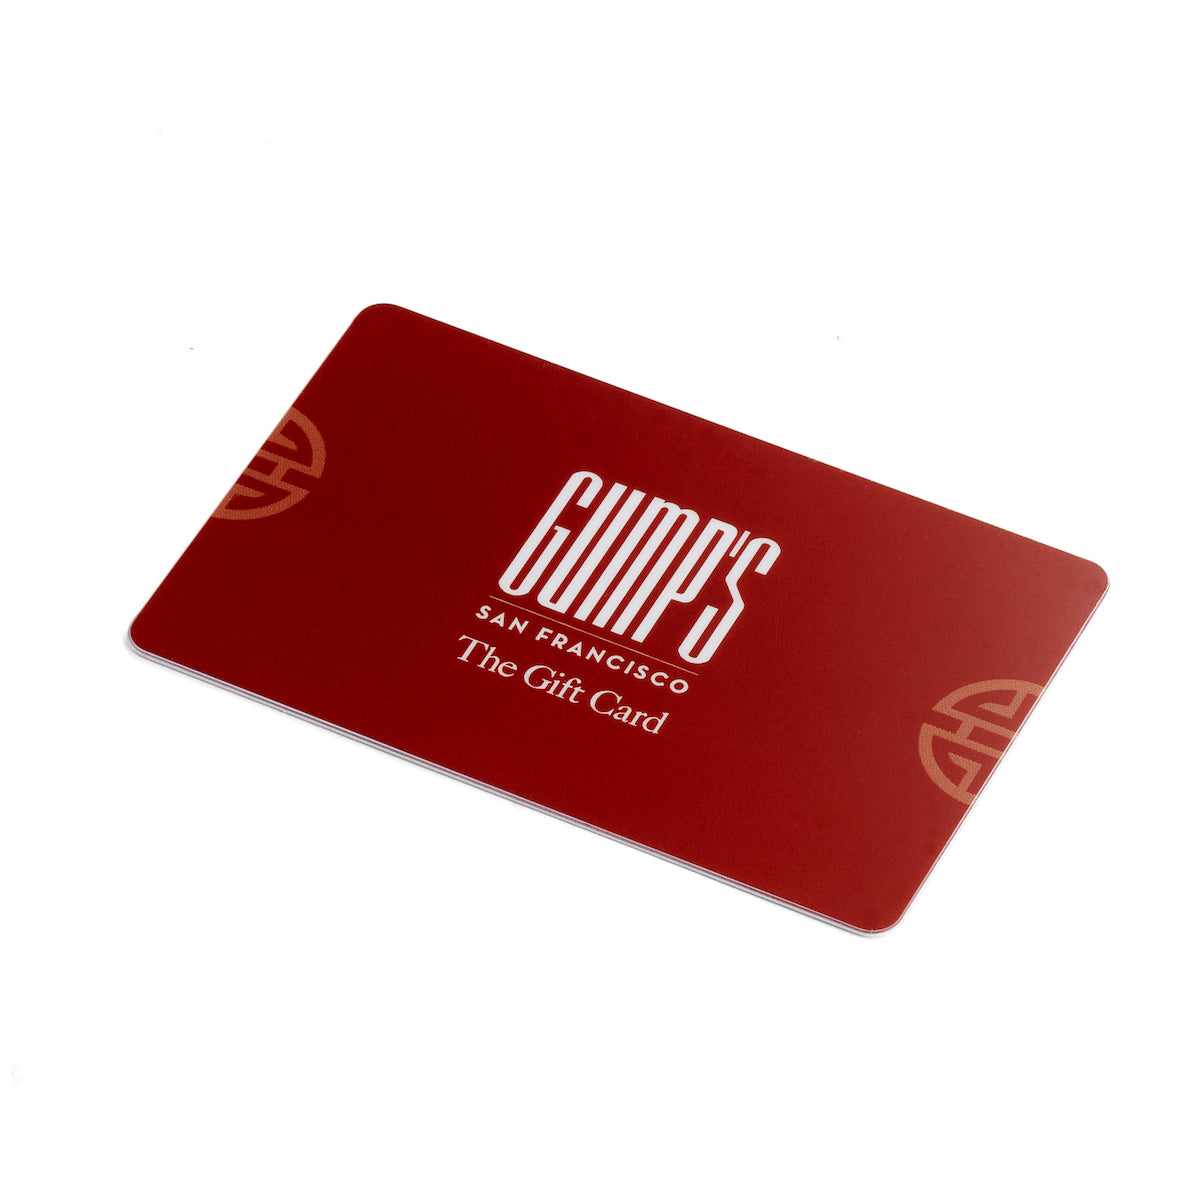 The Gump's Gift Card $100